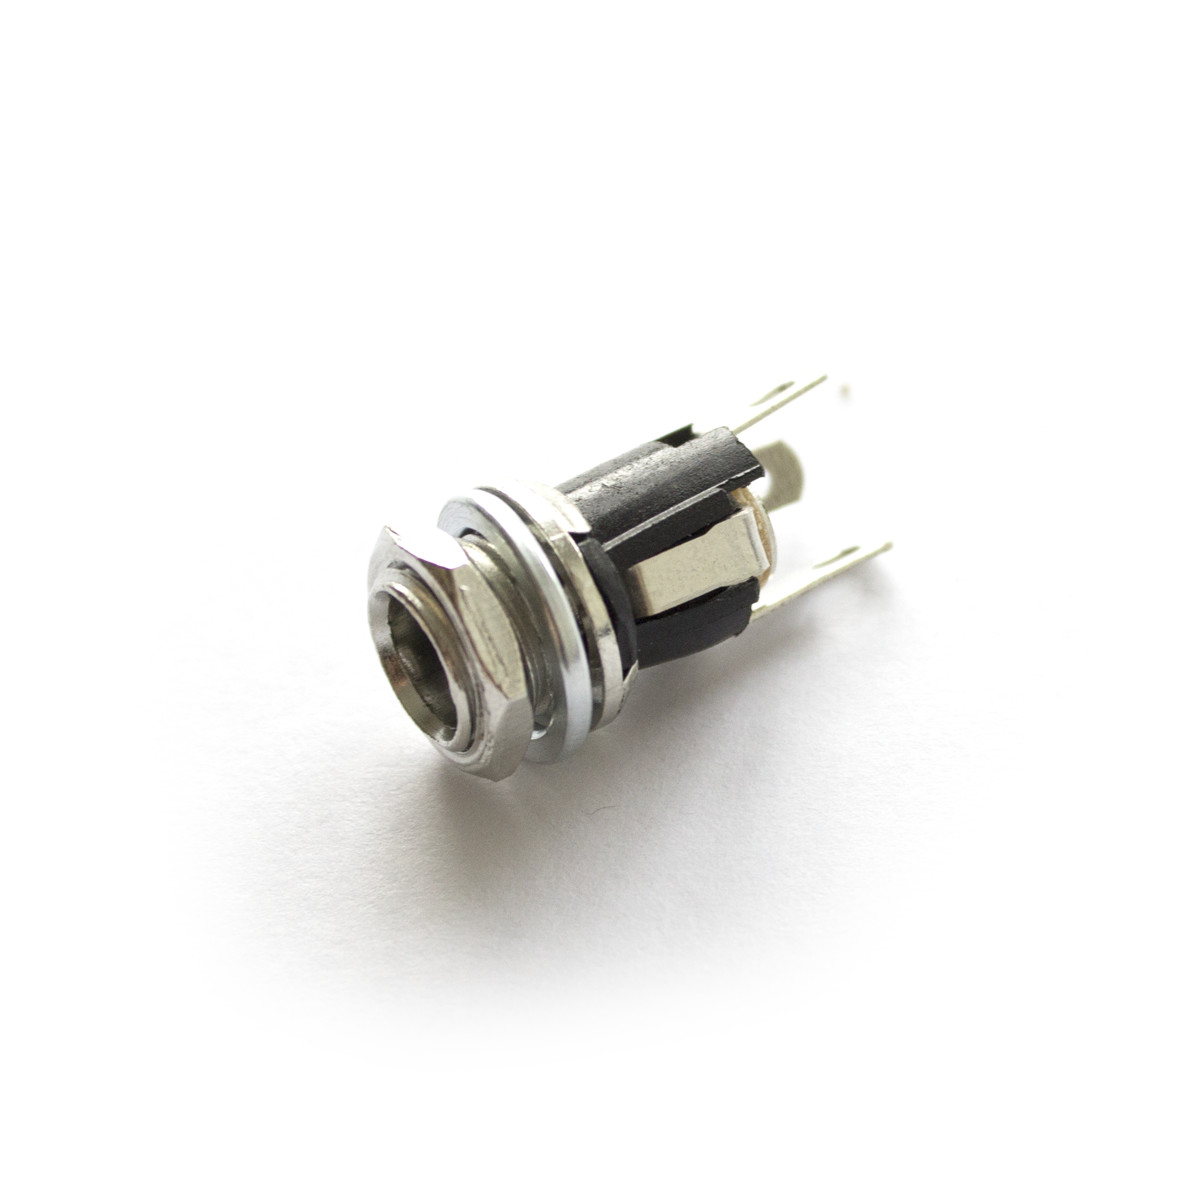 Coaxial power connector, 5.5x2.1mm